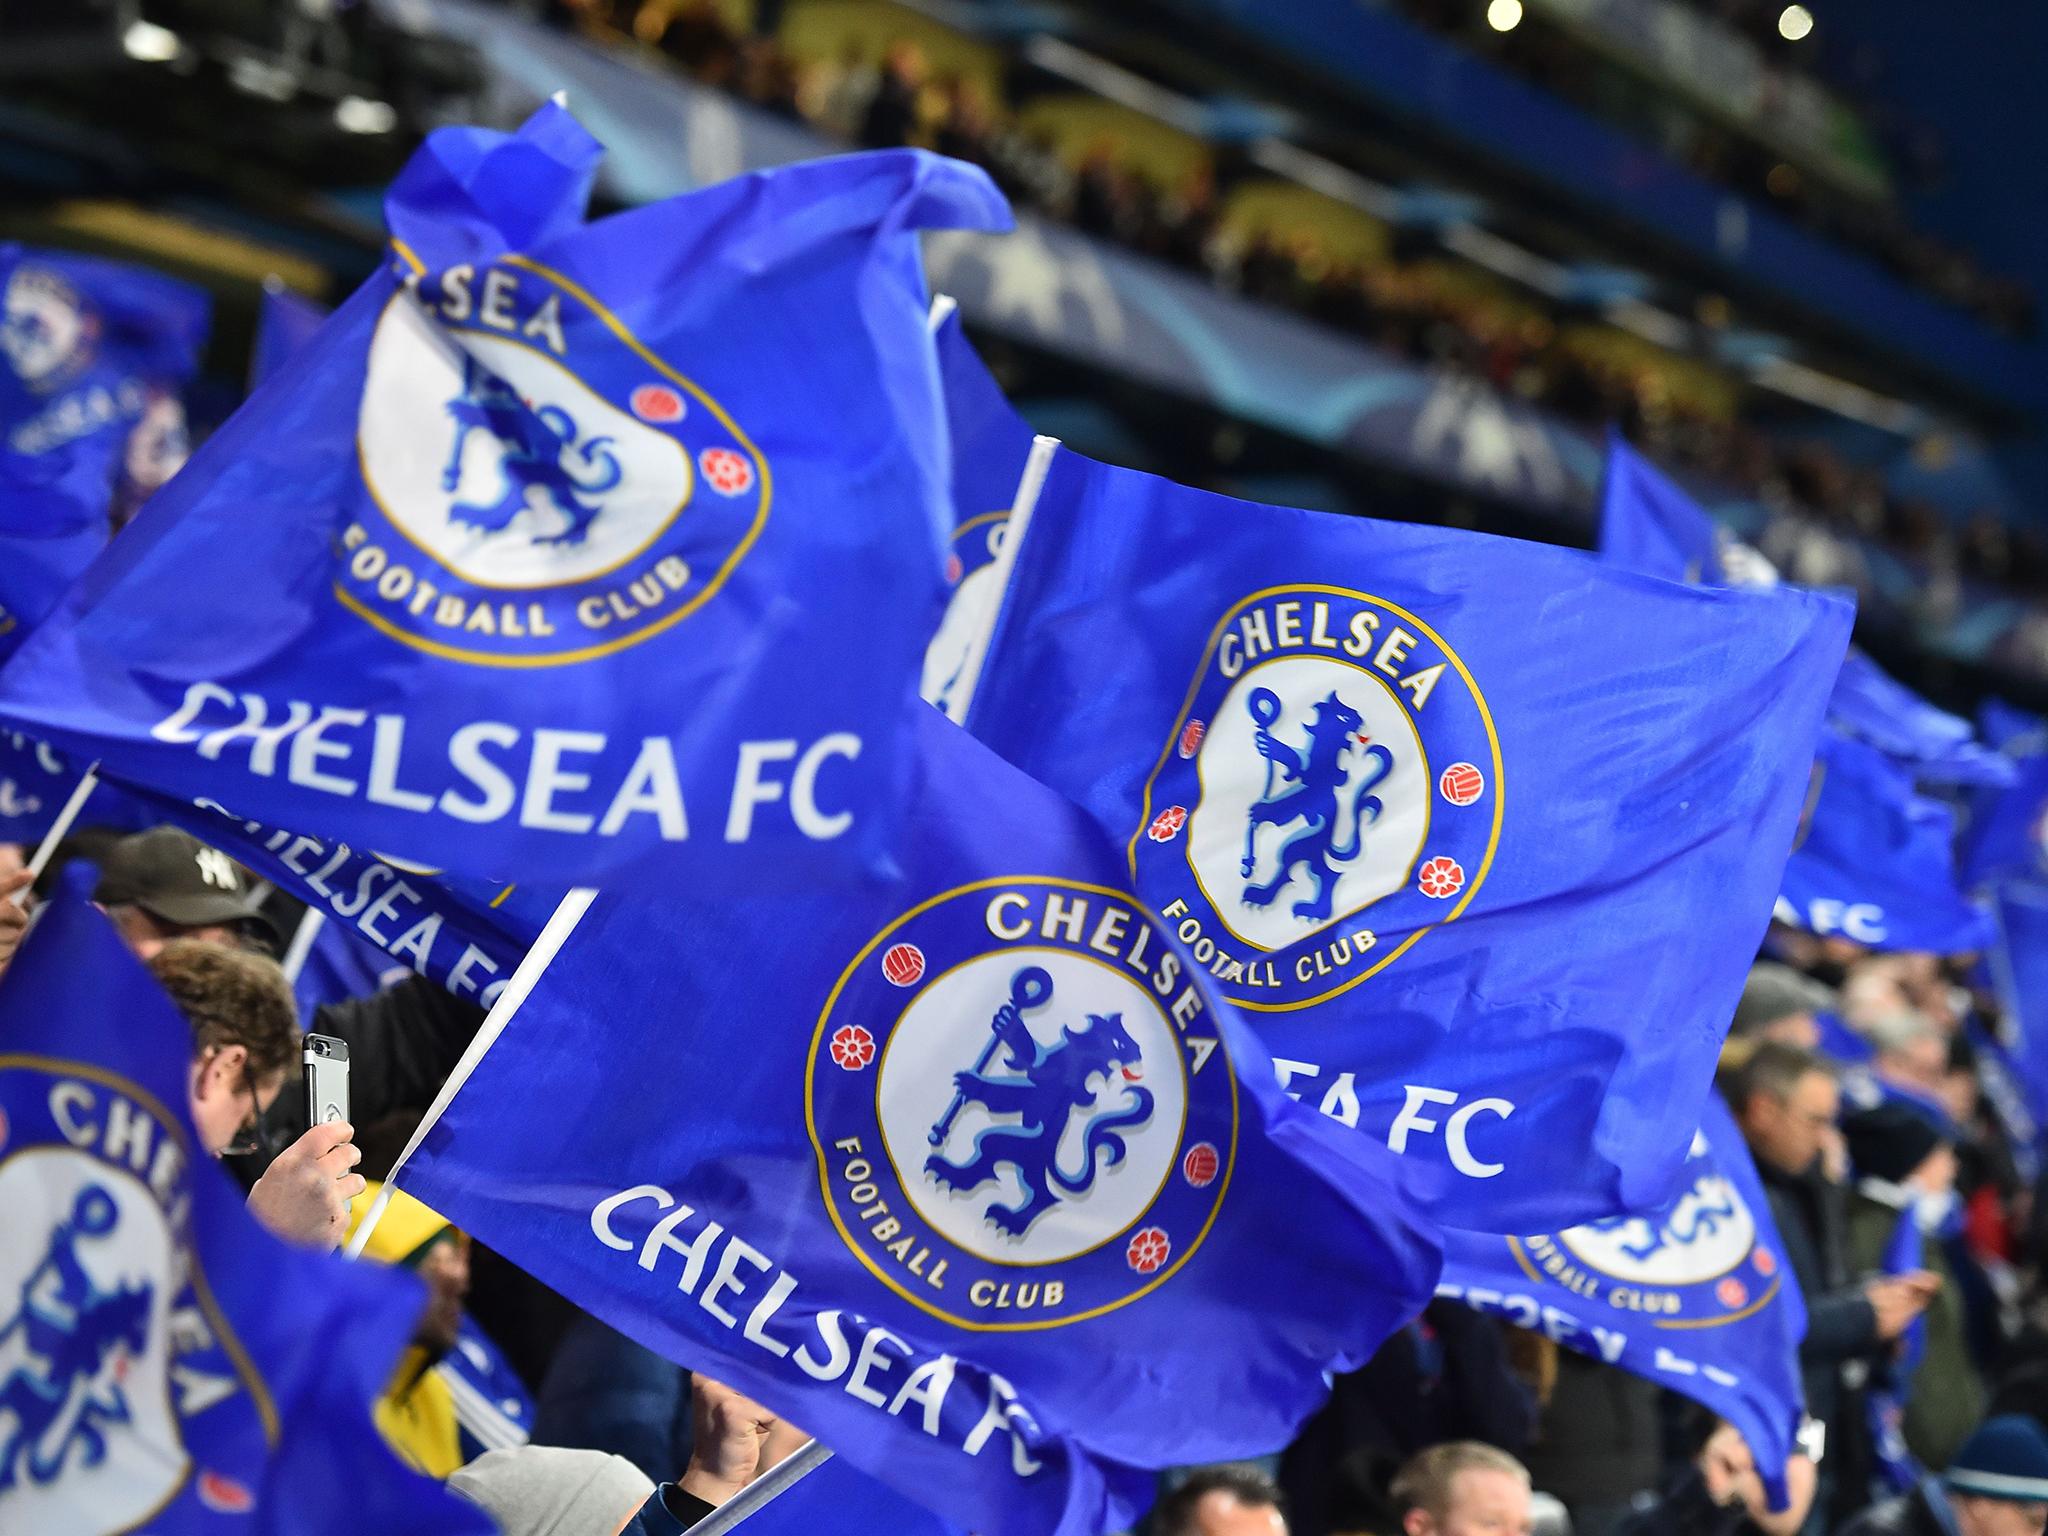 Chelsea fans are under extra scrutiny due to recent incidents